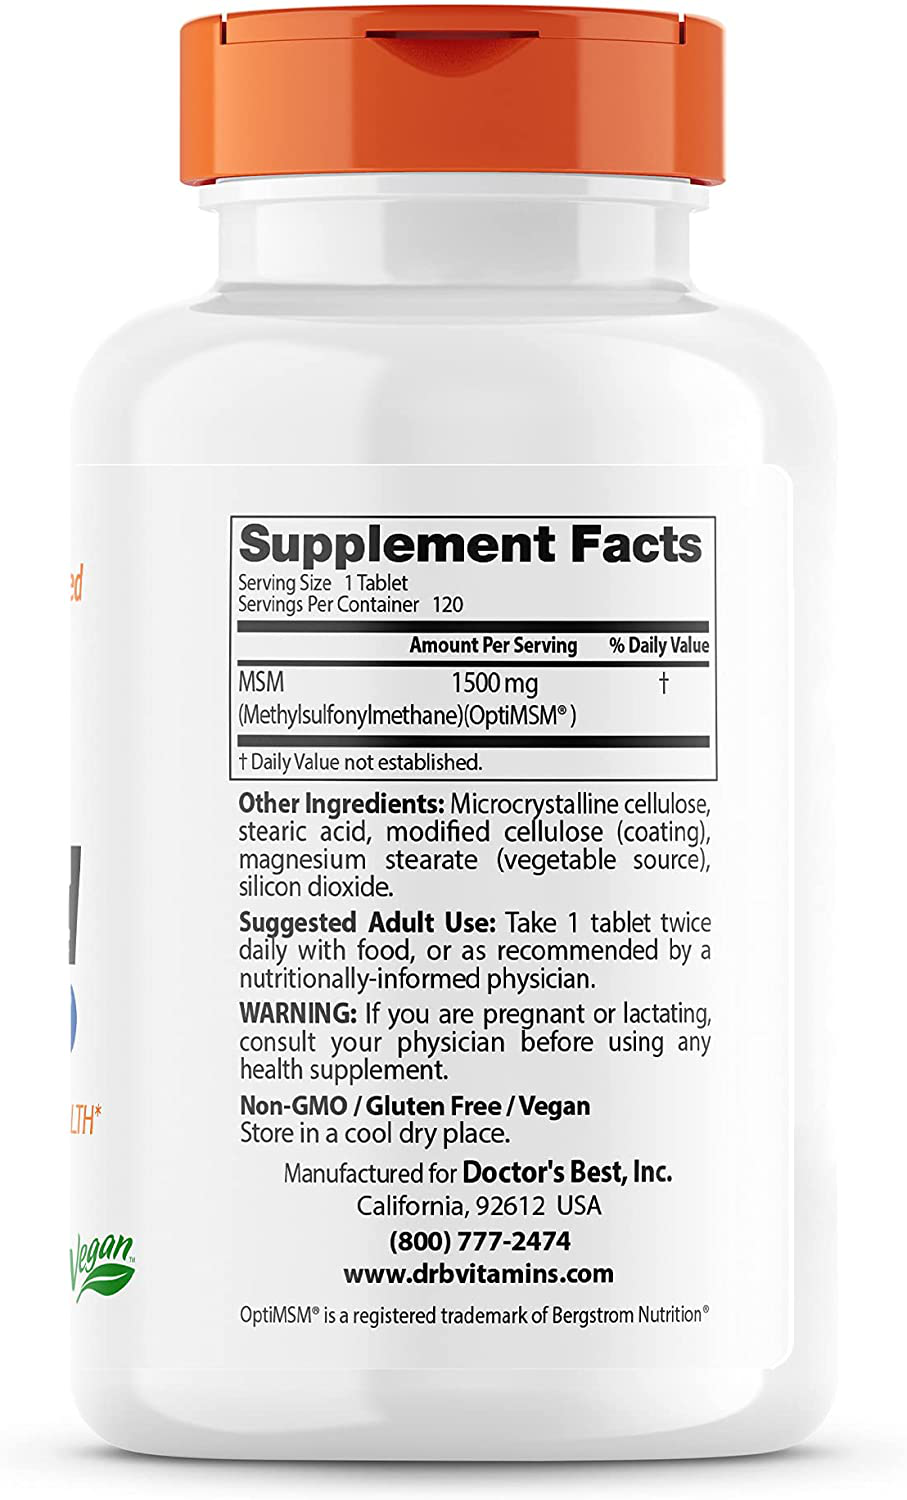 Doctor's Best MSM with OptiMSM, Non-GMO, Gluten Free, Joint Support, 1500 mg, 120 Tablets (DRB-00097)